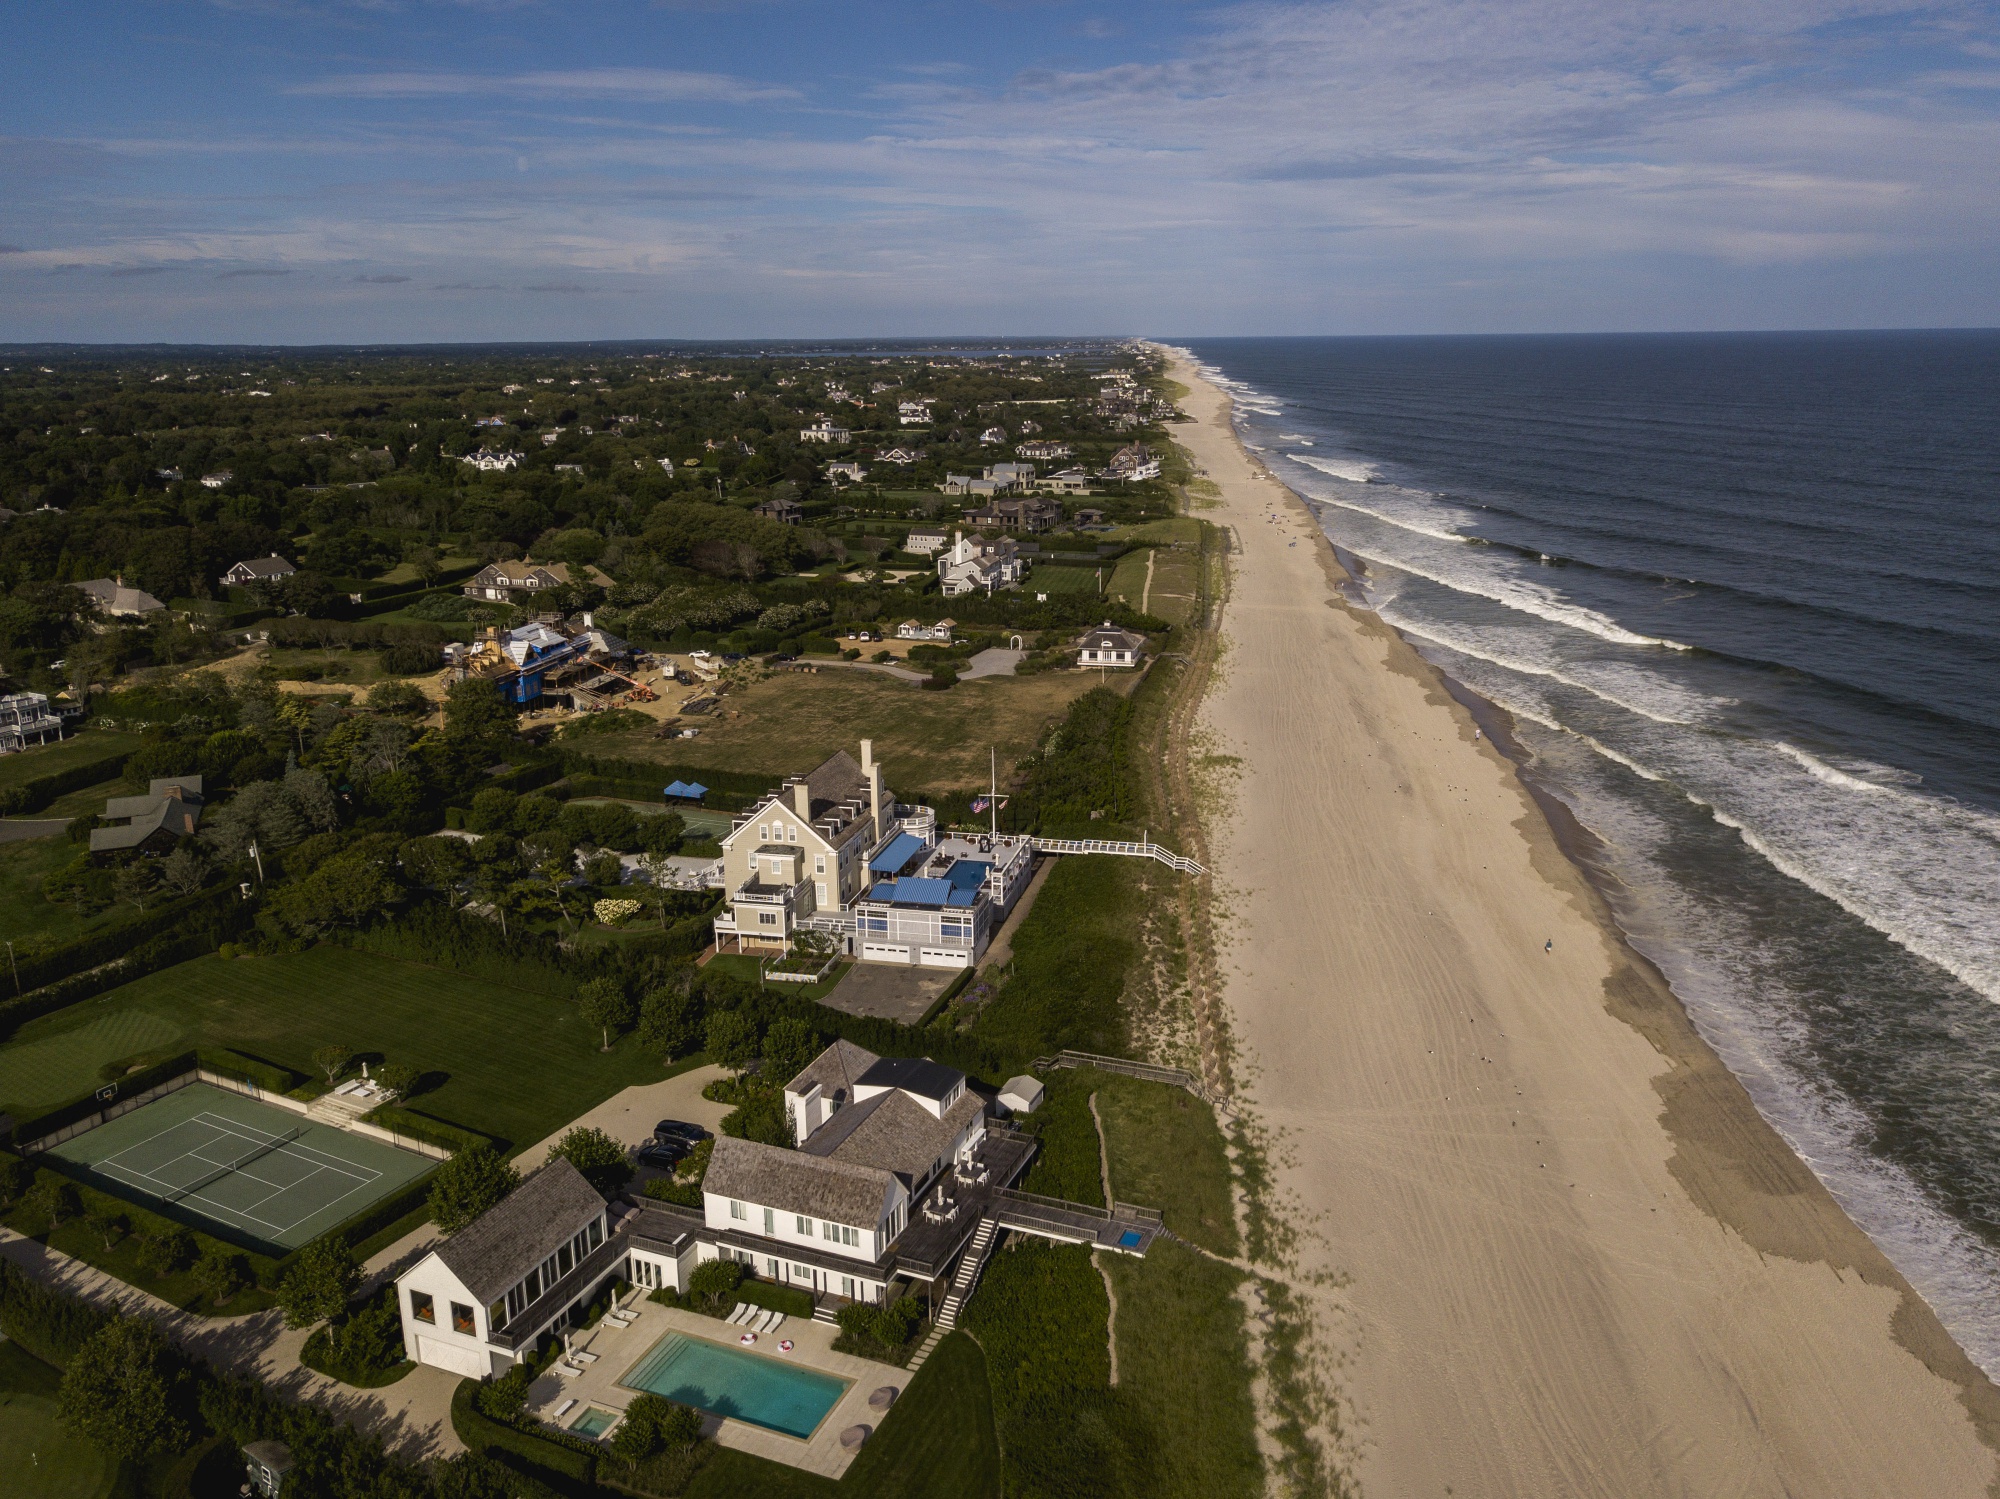 Homes in Southampton, New York.